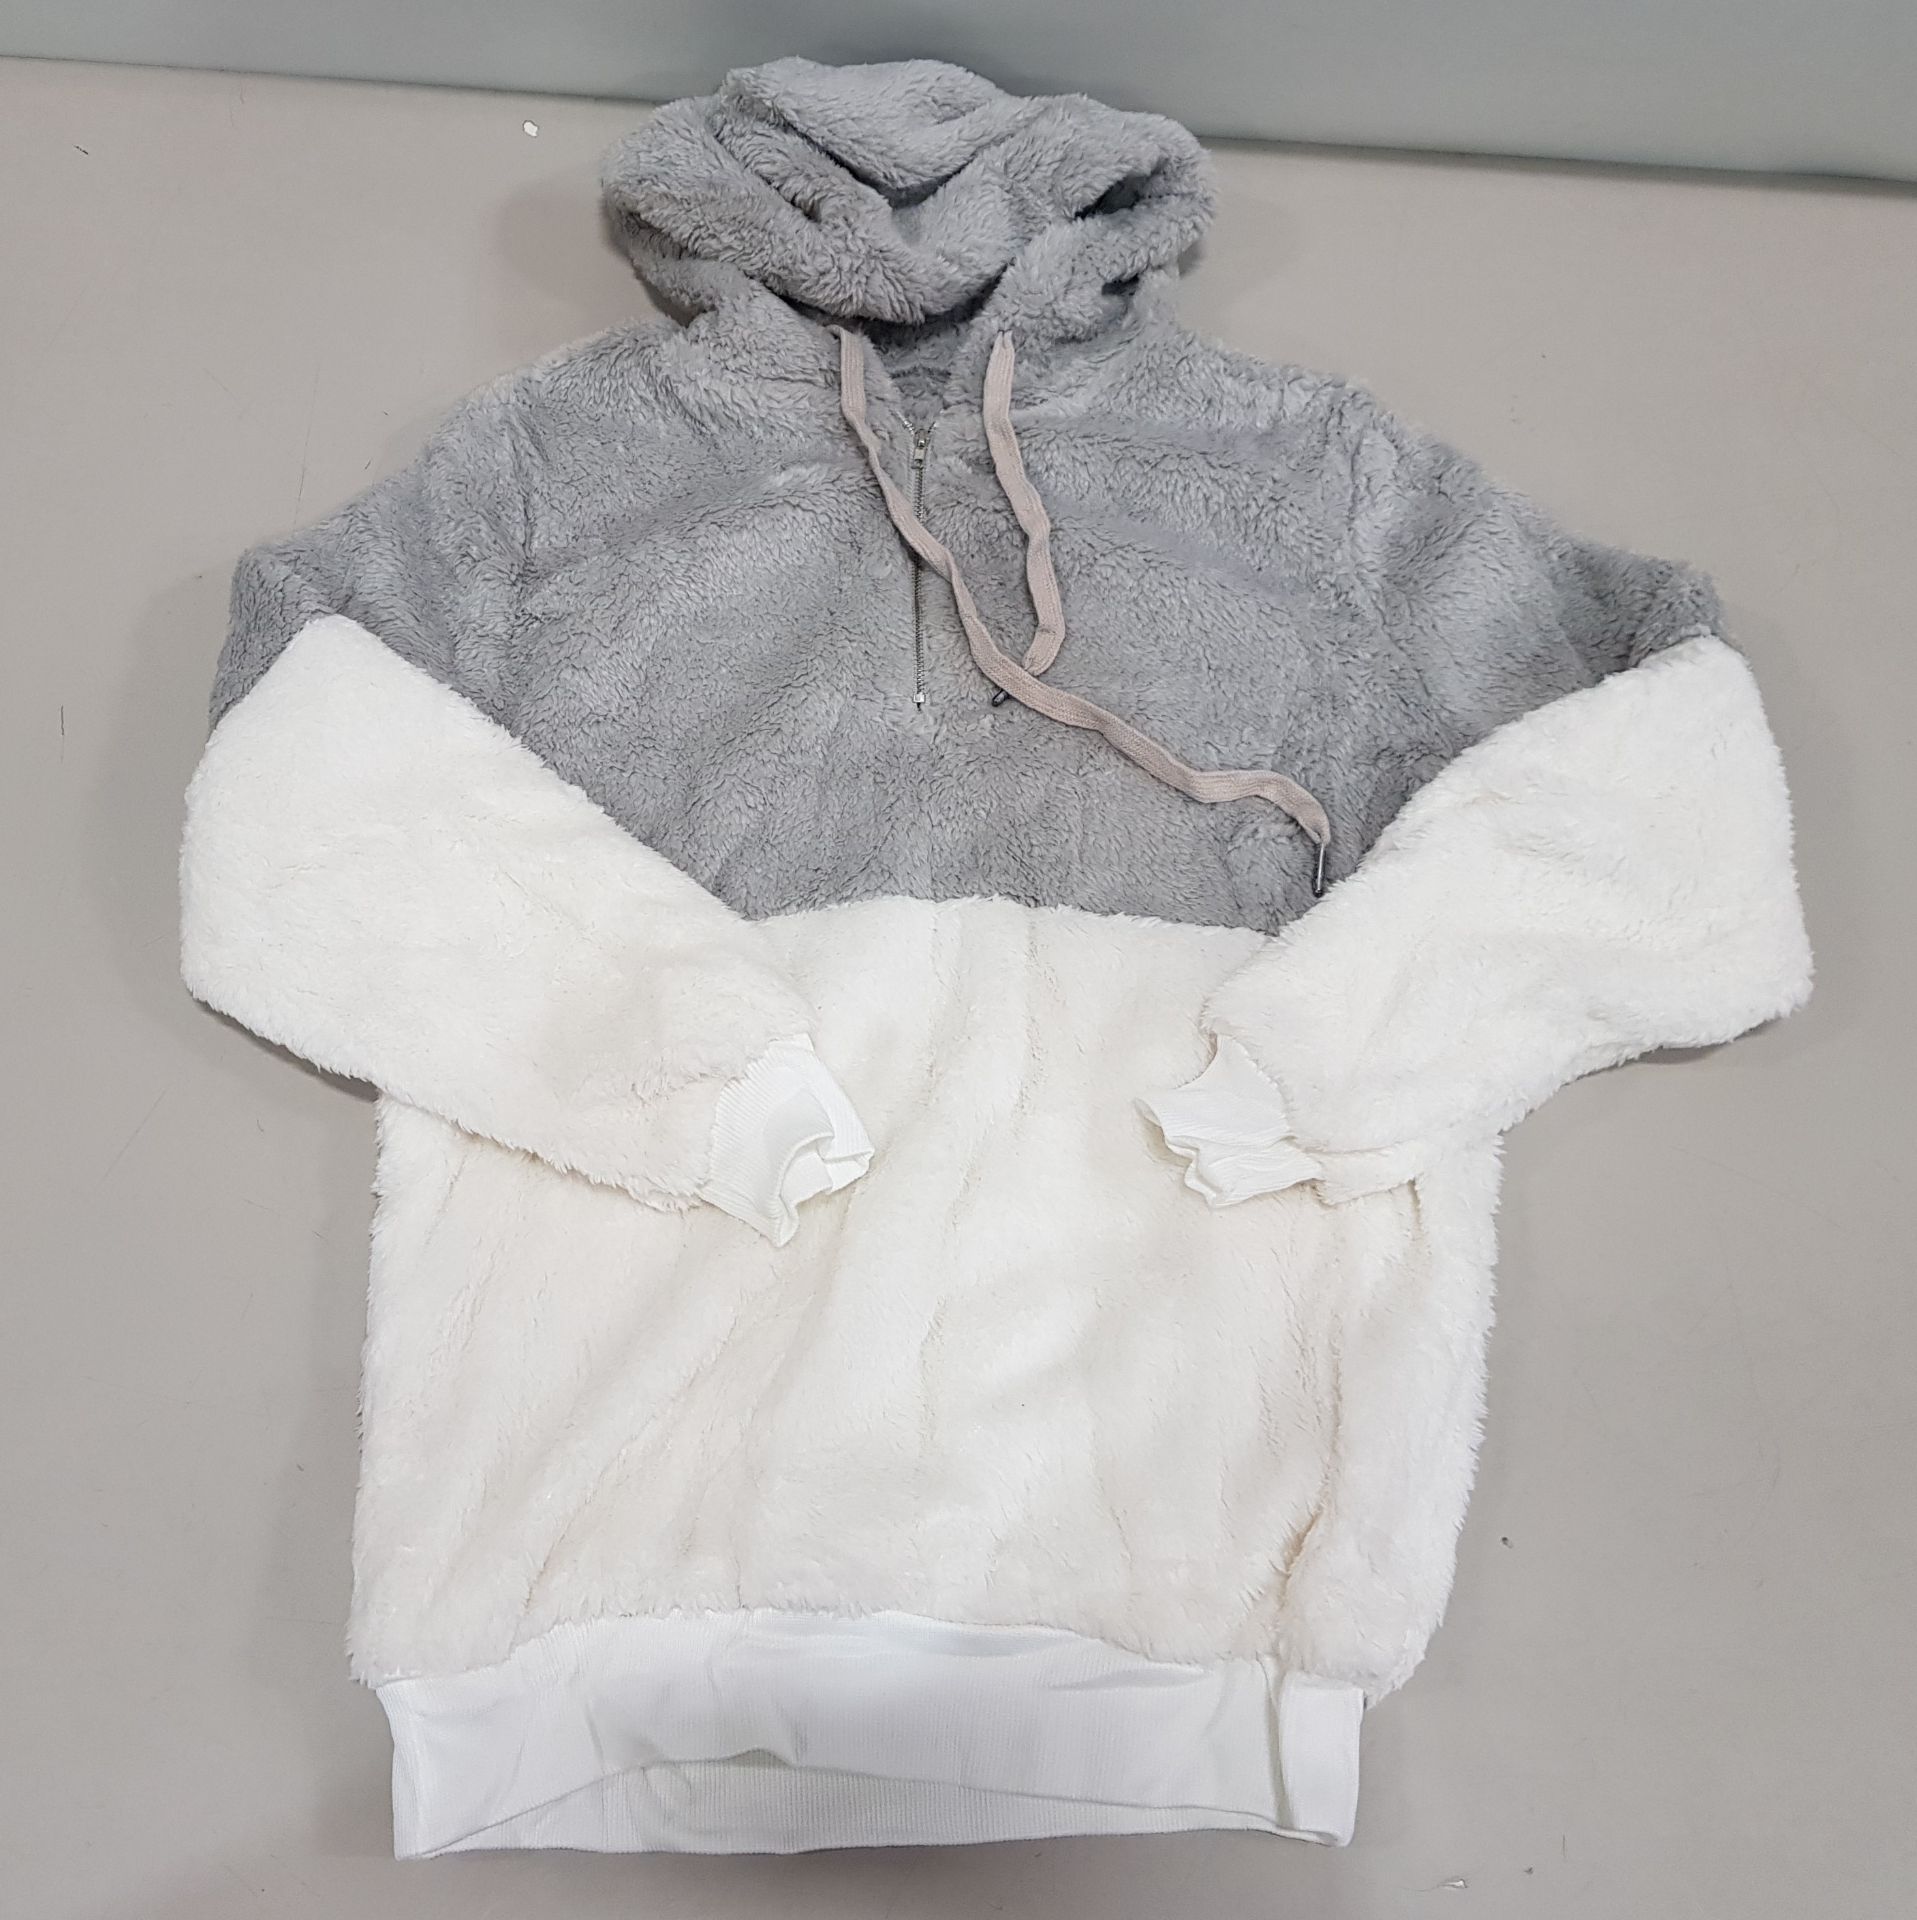 40 X BRAND NEW BWIV WOMANS BAGGY FLUFFY QUARTER ZIP HOODED SWEATSHIRTS ALL IN PURE WHITE AND LIGHT